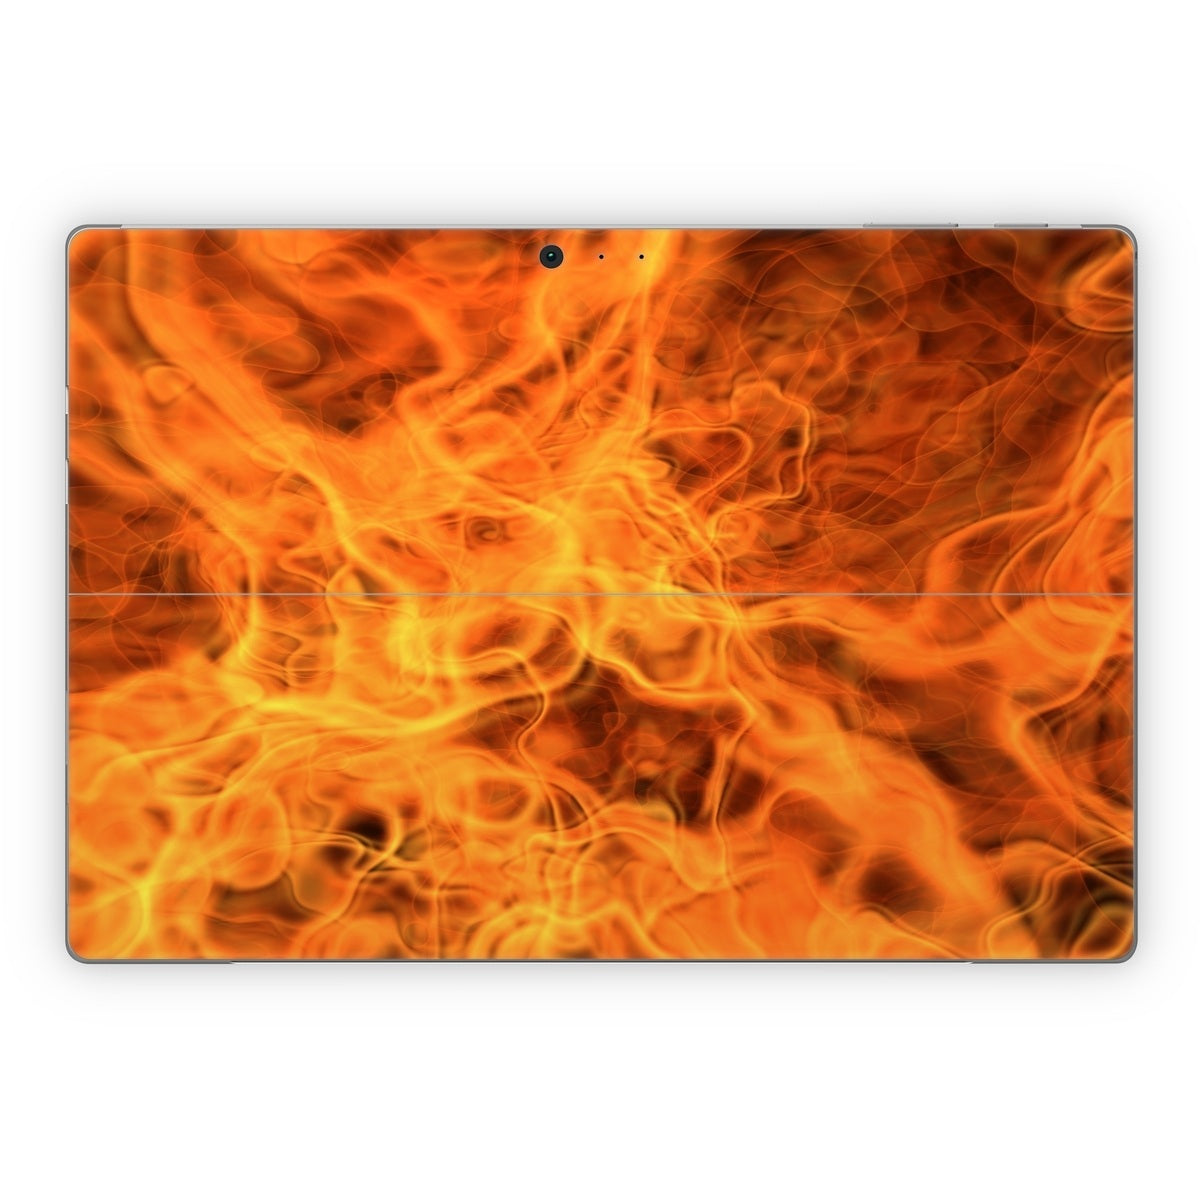 Combustion - Microsoft Surface Pro Skin